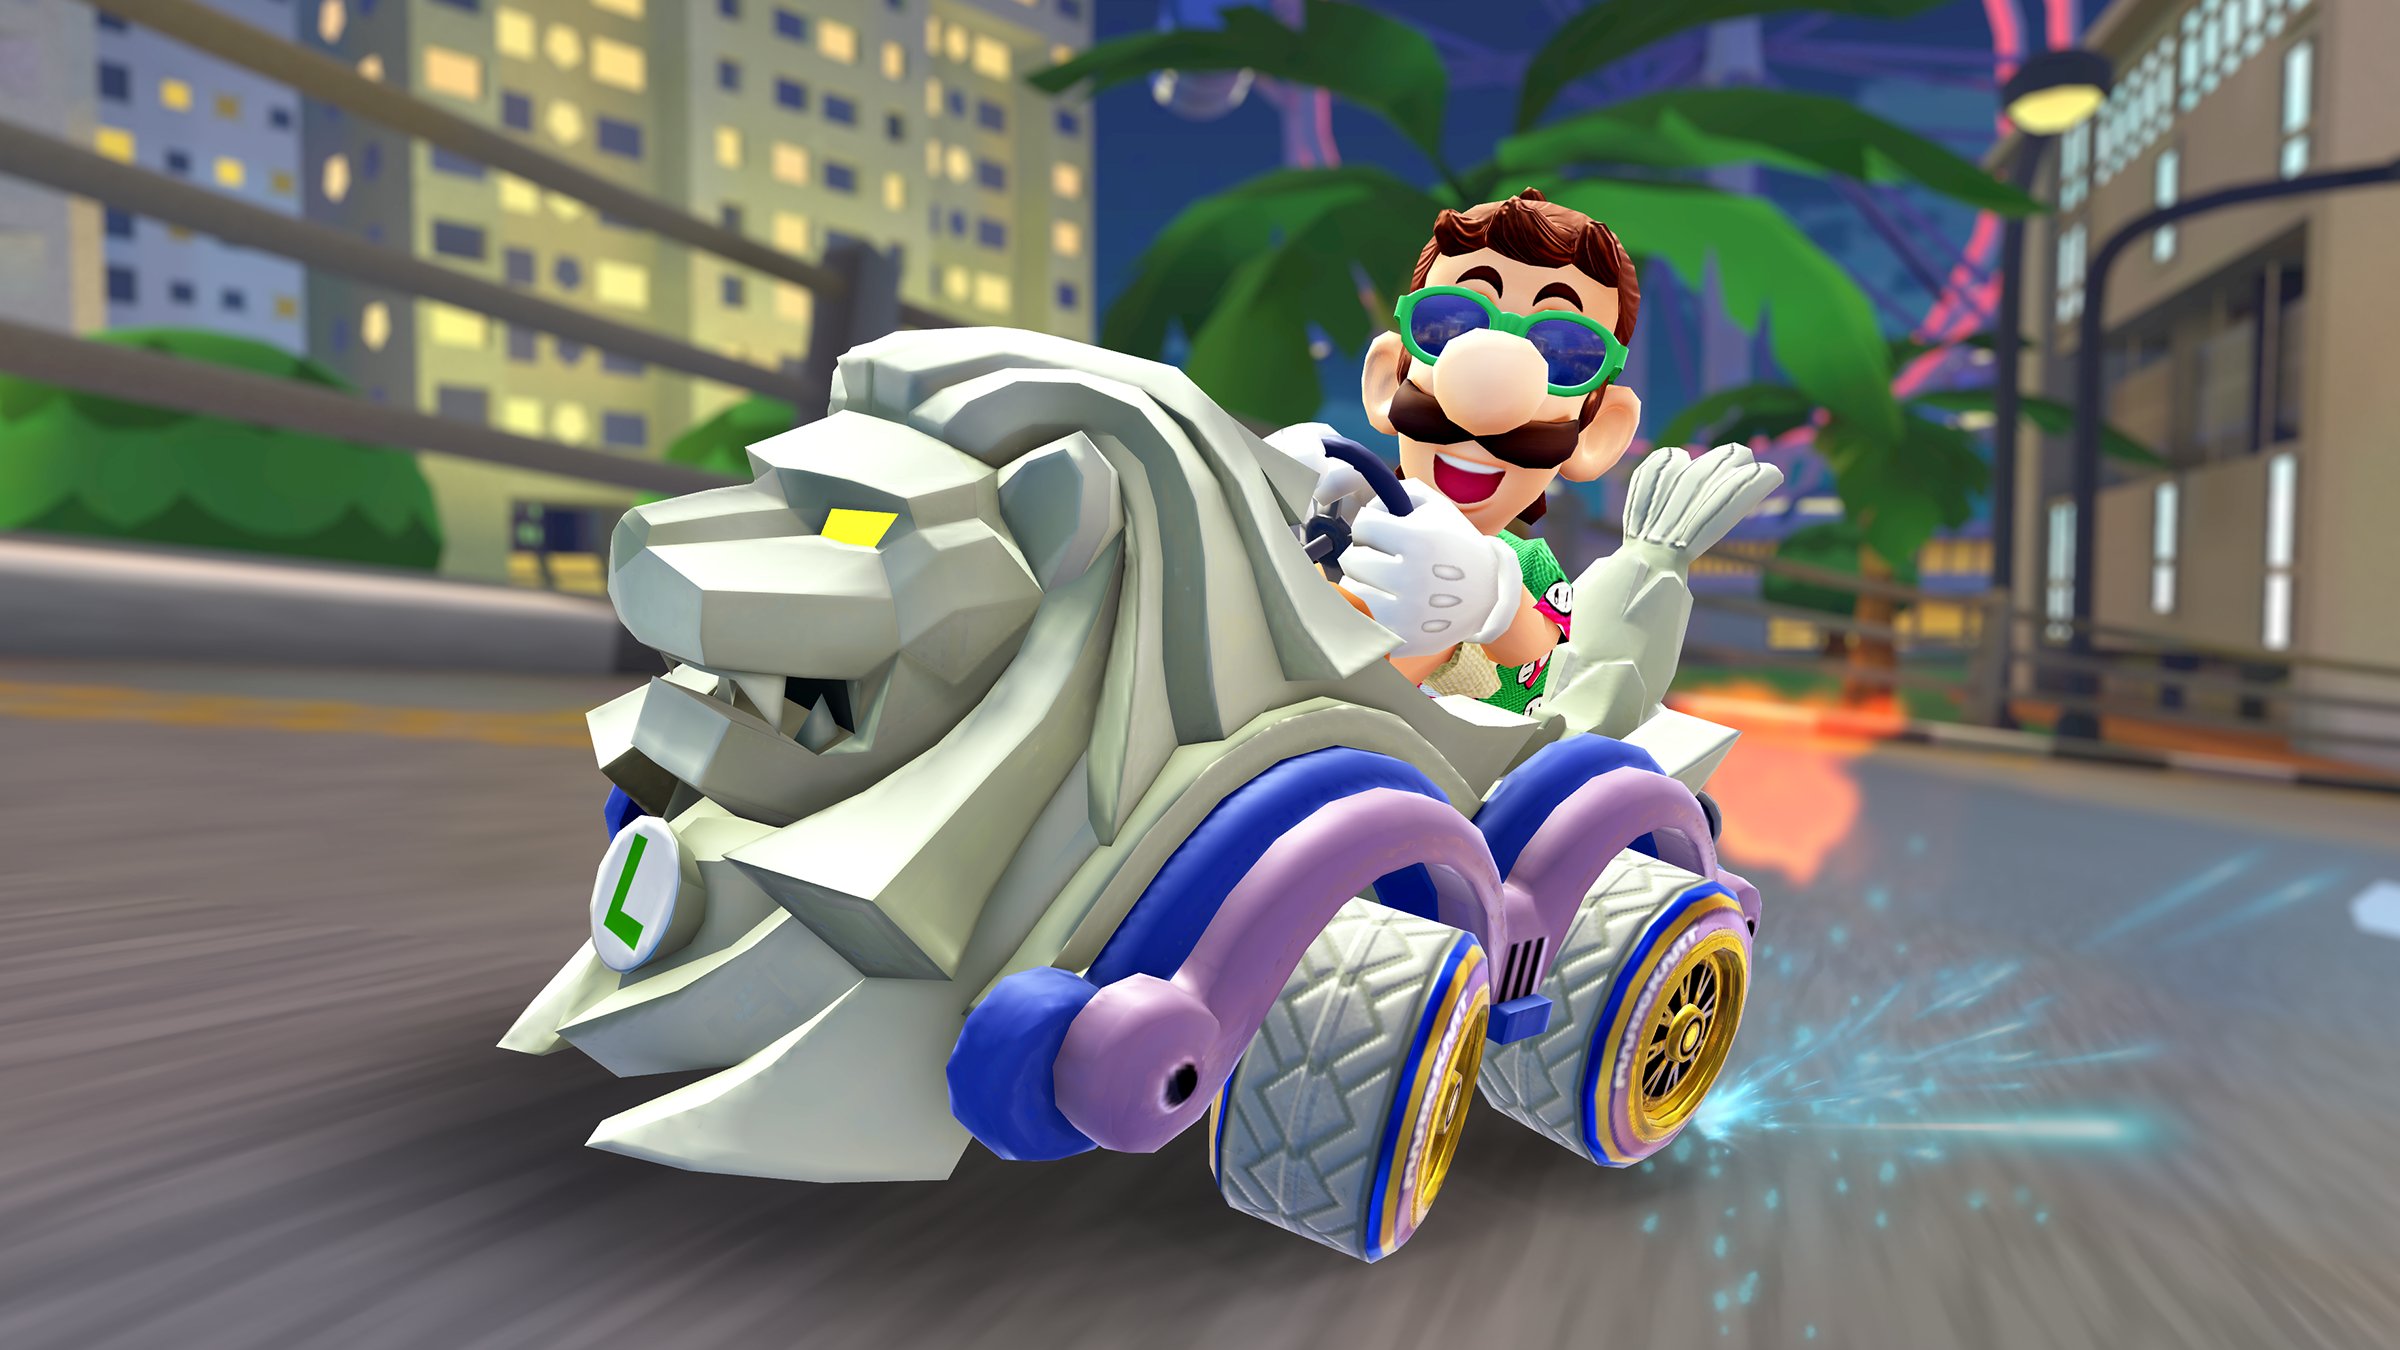 Mario Kart Tour on X: The Paris Tour is wrapping up in #MarioKartTour.  Next up is the Summer Tour, featuring the new course GBA Cheep-Cheep  Island!  / X